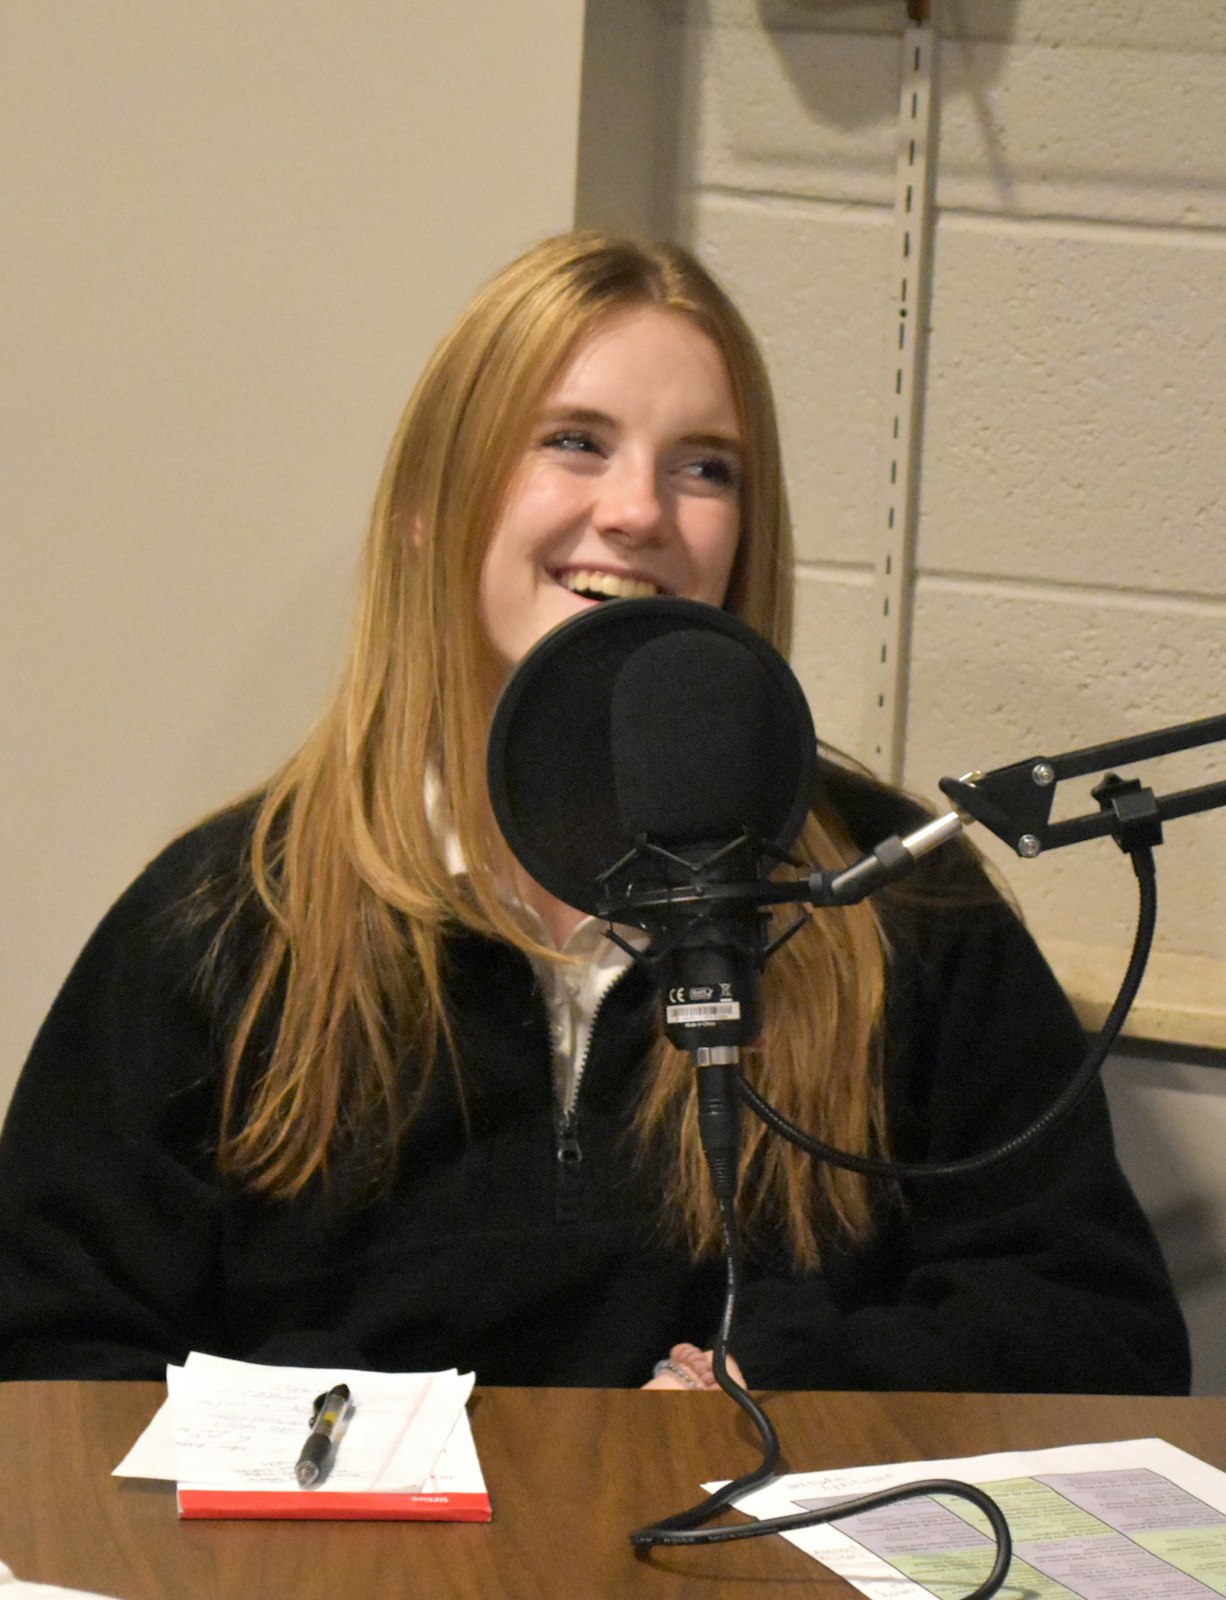 Junior Alexandria Tomajko, one of the co-hosts, wanted to get involved in "The DC Godcast" after learning of the effort from Brahier, one of her former theology teachers.